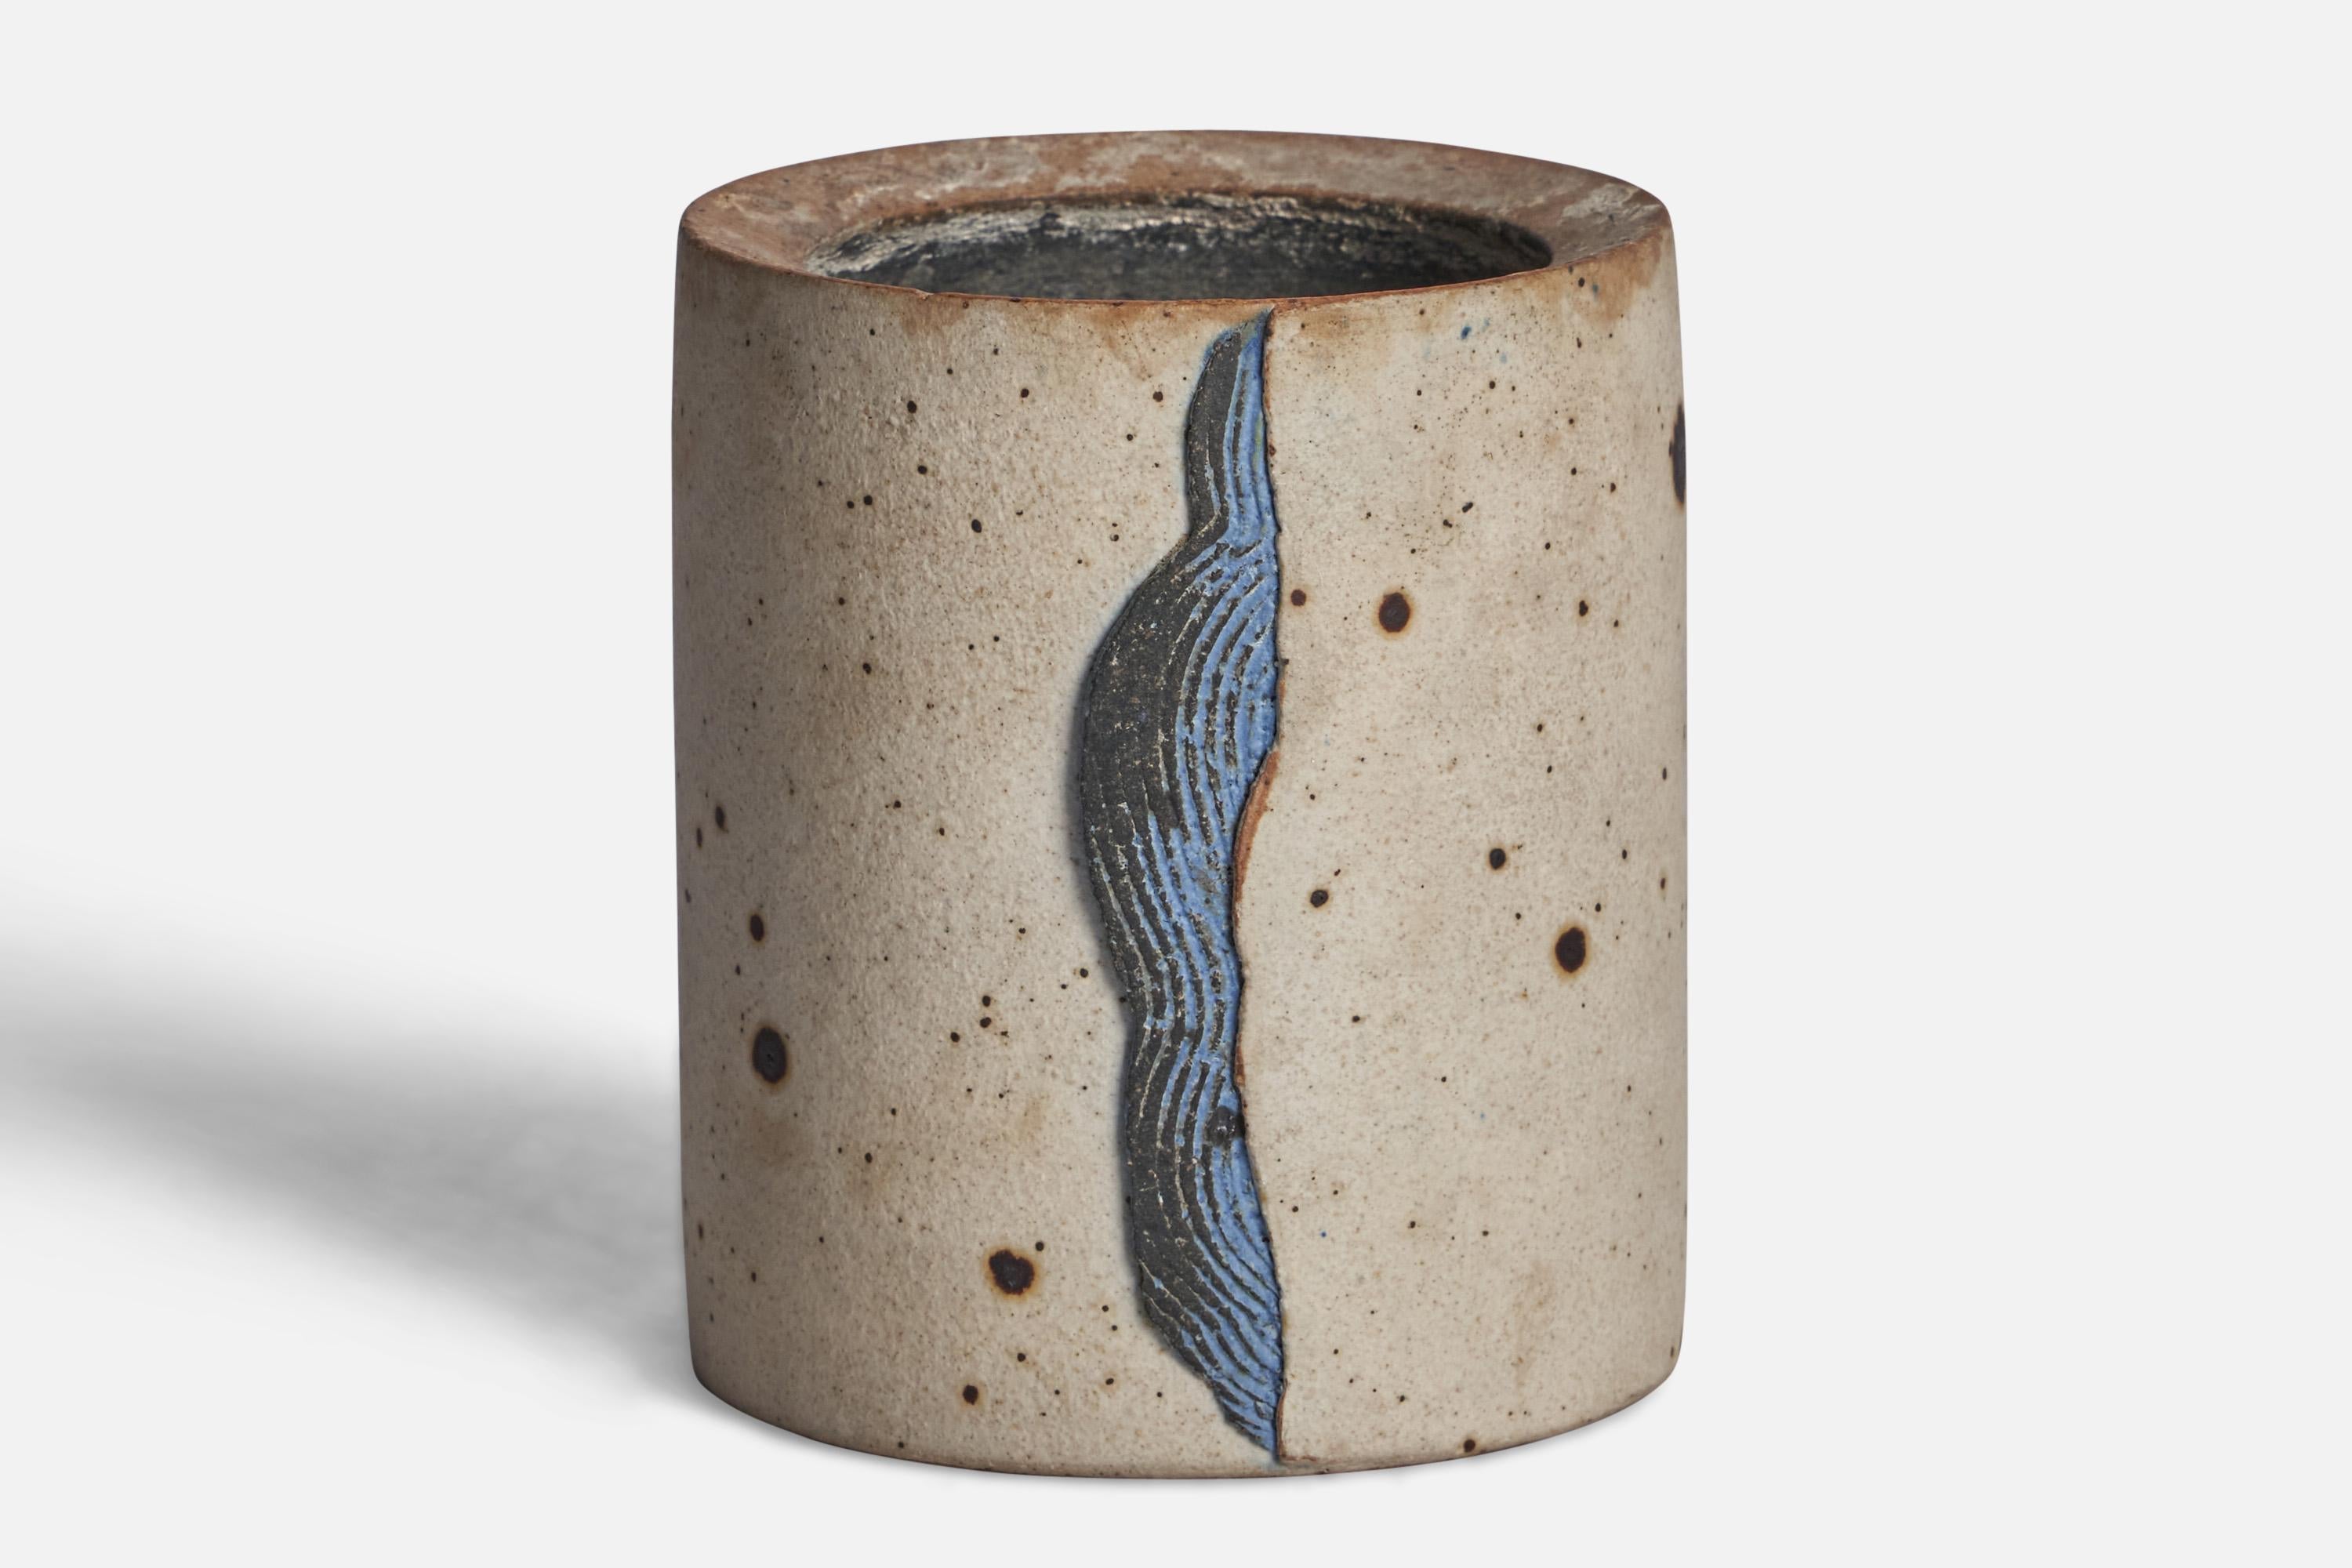 A grey and blue-glazed stoneware vase designed and produced by Richard Menz, Denmark, 1970s.